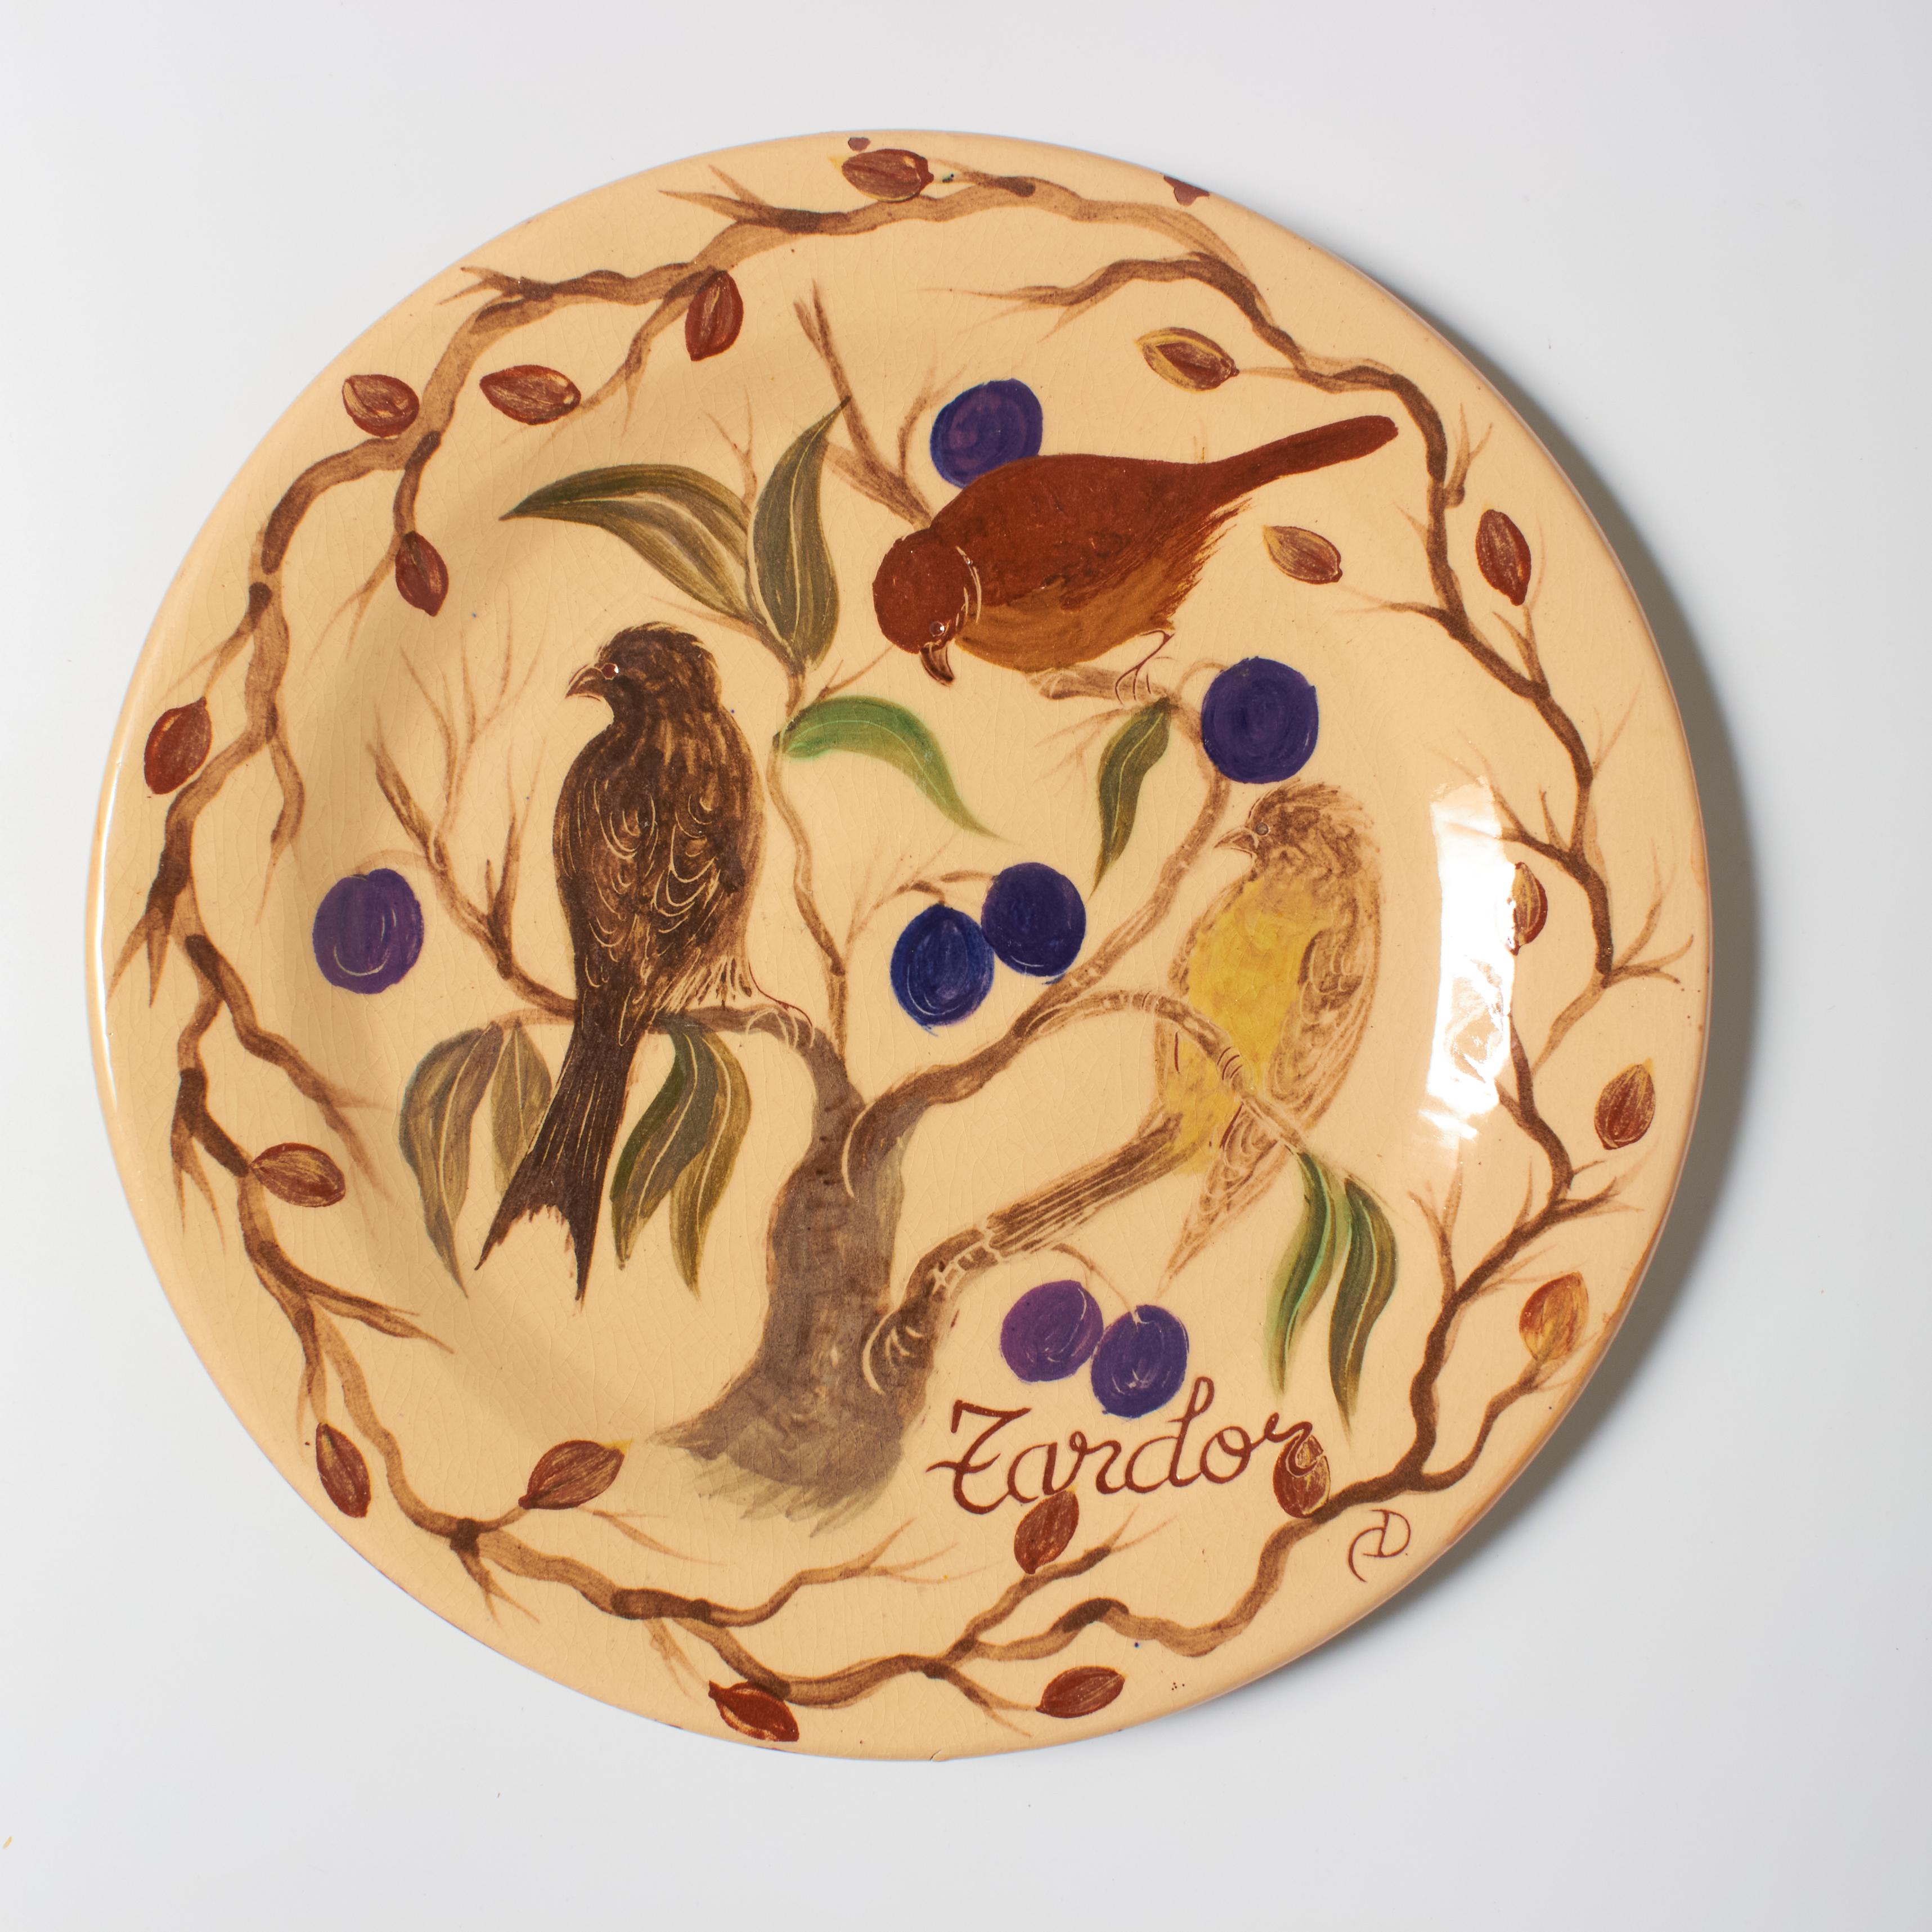 Immerse yourself in the artistic legacy of Catalan artist Diaz Costa with our vintage hand-painted ceramic plate artwork, circa 1960. This exquisite piece captures the essence of mid-century design, showcasing Diaz Costa's craftsmanship and unique